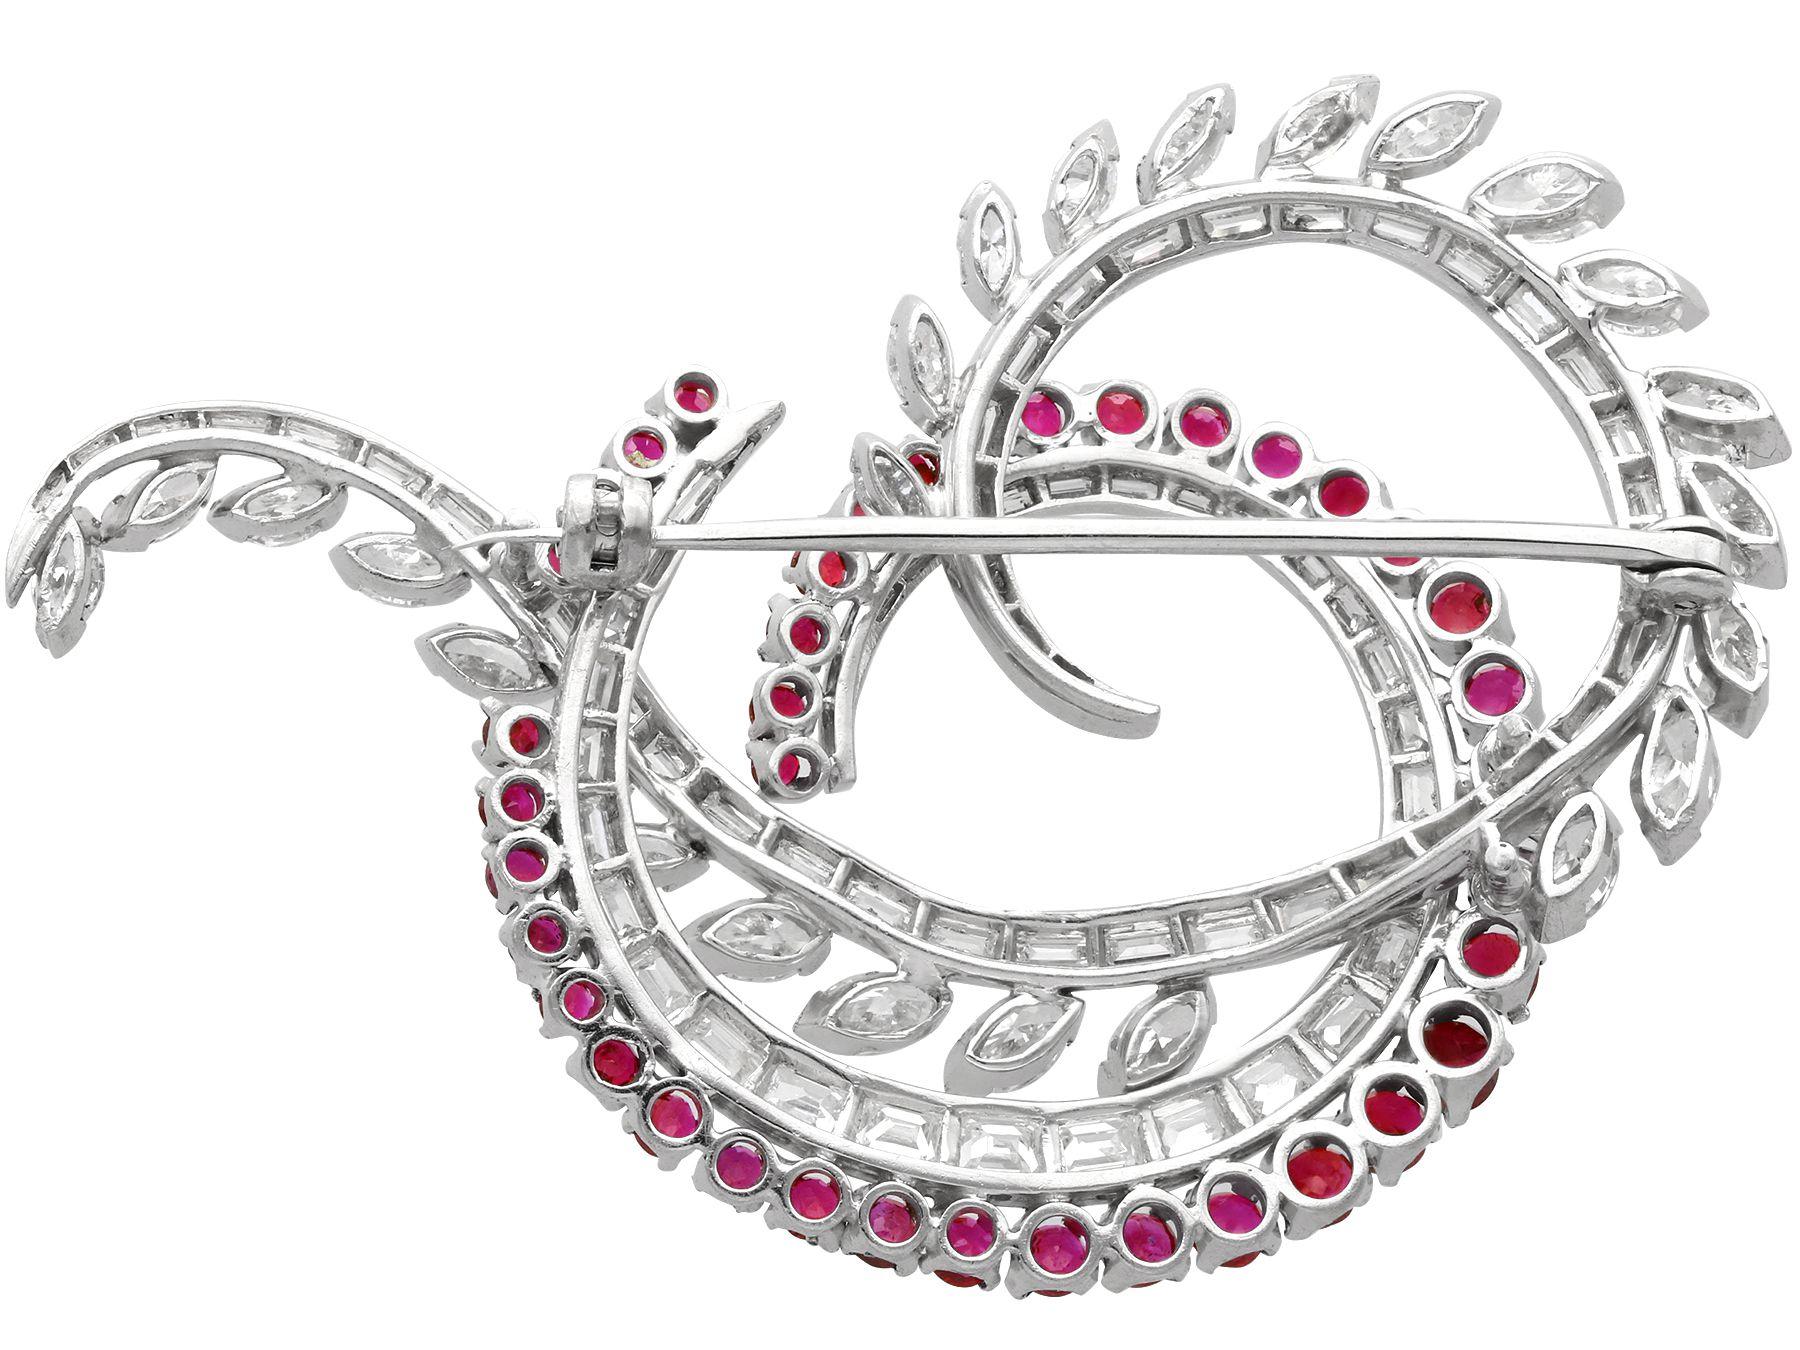 Vintage 7.35 Carat Diamond and 1.95 Carat Ruby Platinum Brooch, circa 1950 In Excellent Condition For Sale In Jesmond, Newcastle Upon Tyne